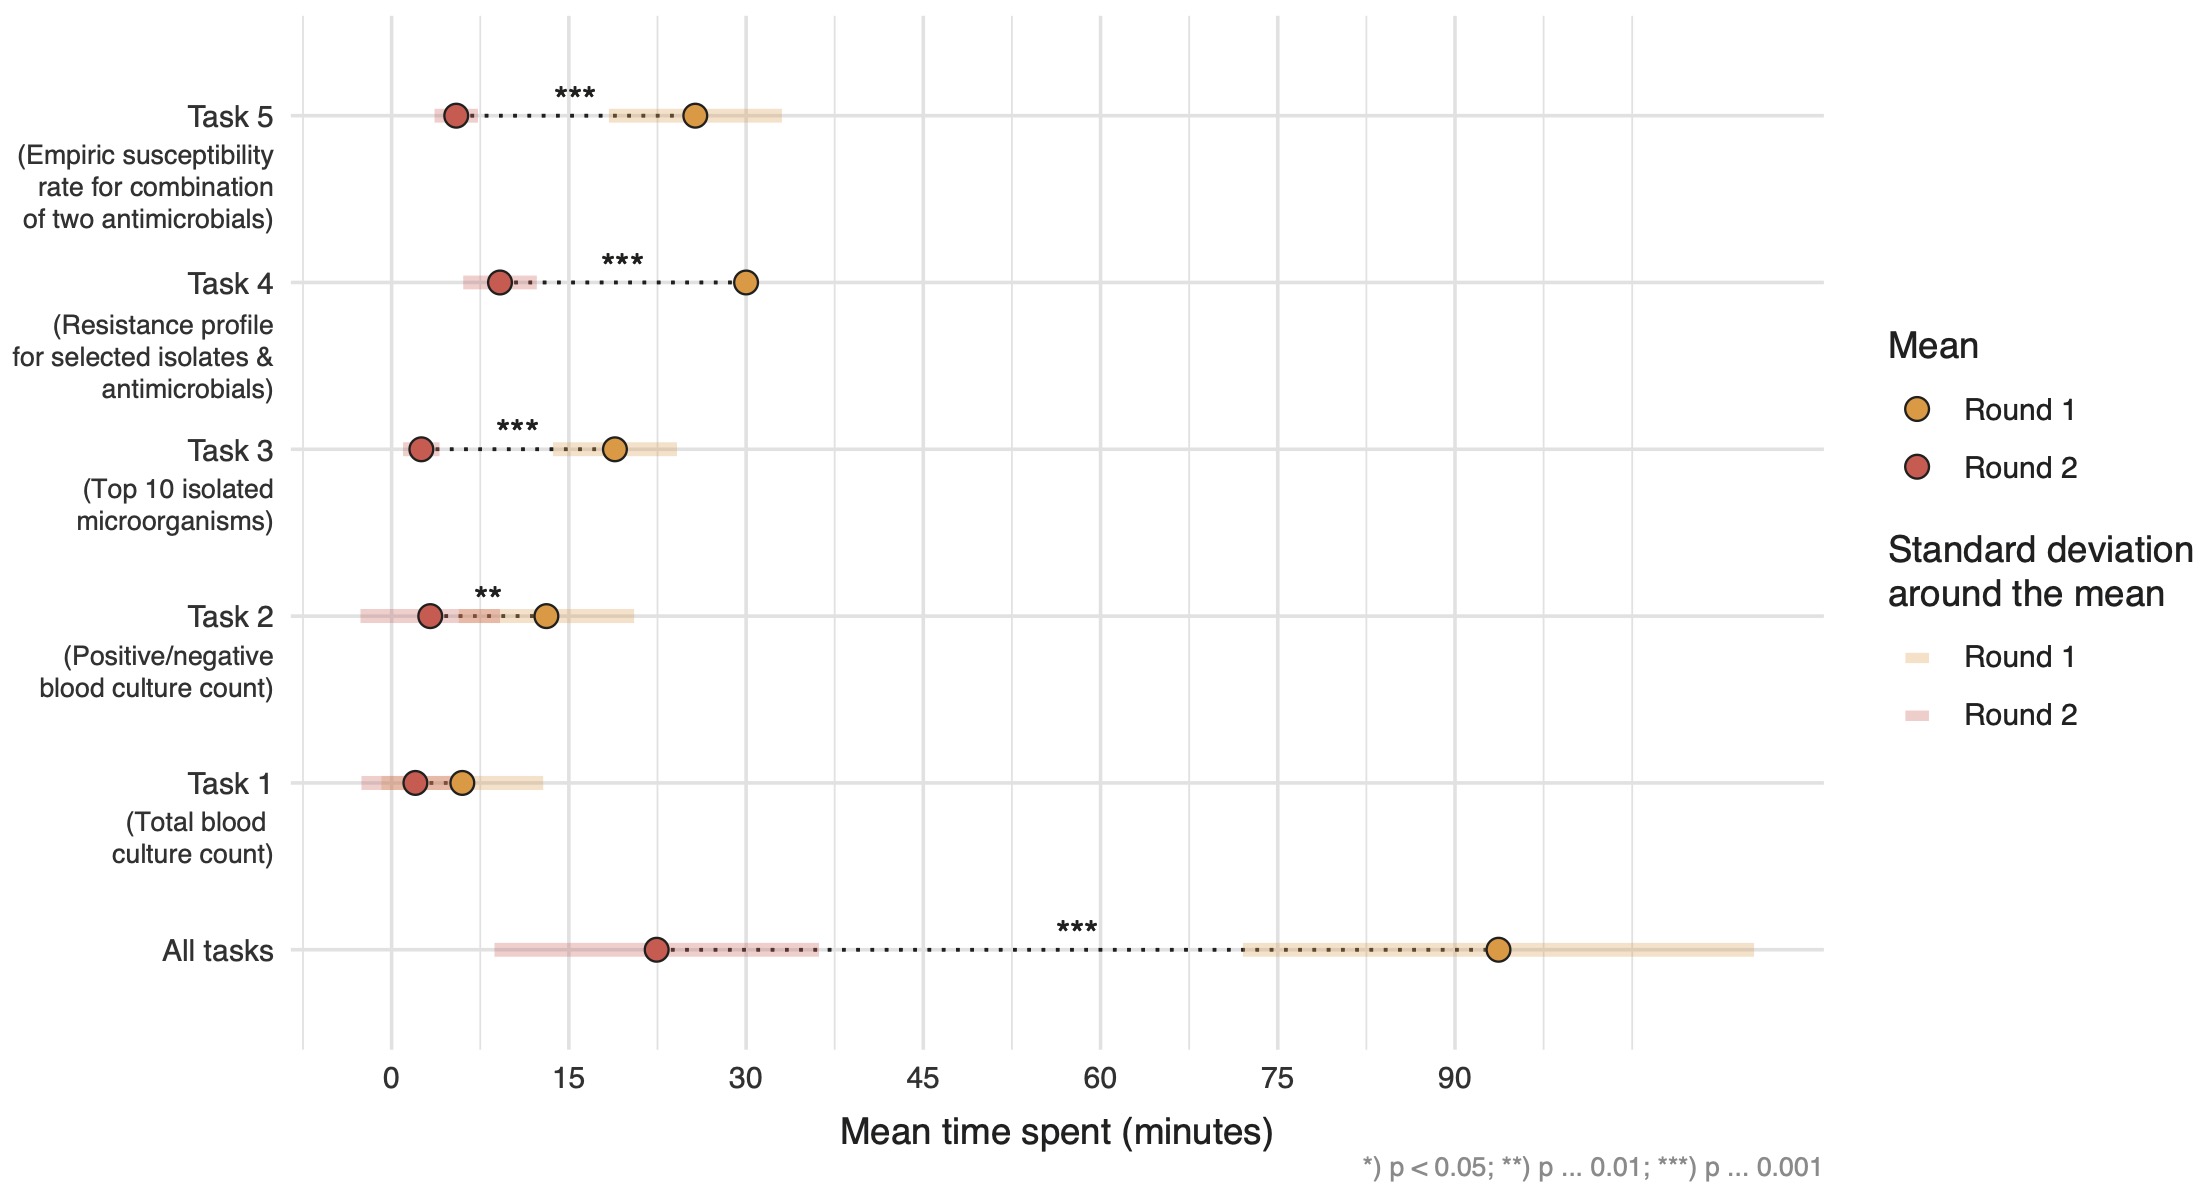 Mean time spent per task in minutes in each round (yellow = first round, red = second round). Statistical significance was tested using two-sided paired t-tests. All results were included irrespective of correctness of the results.